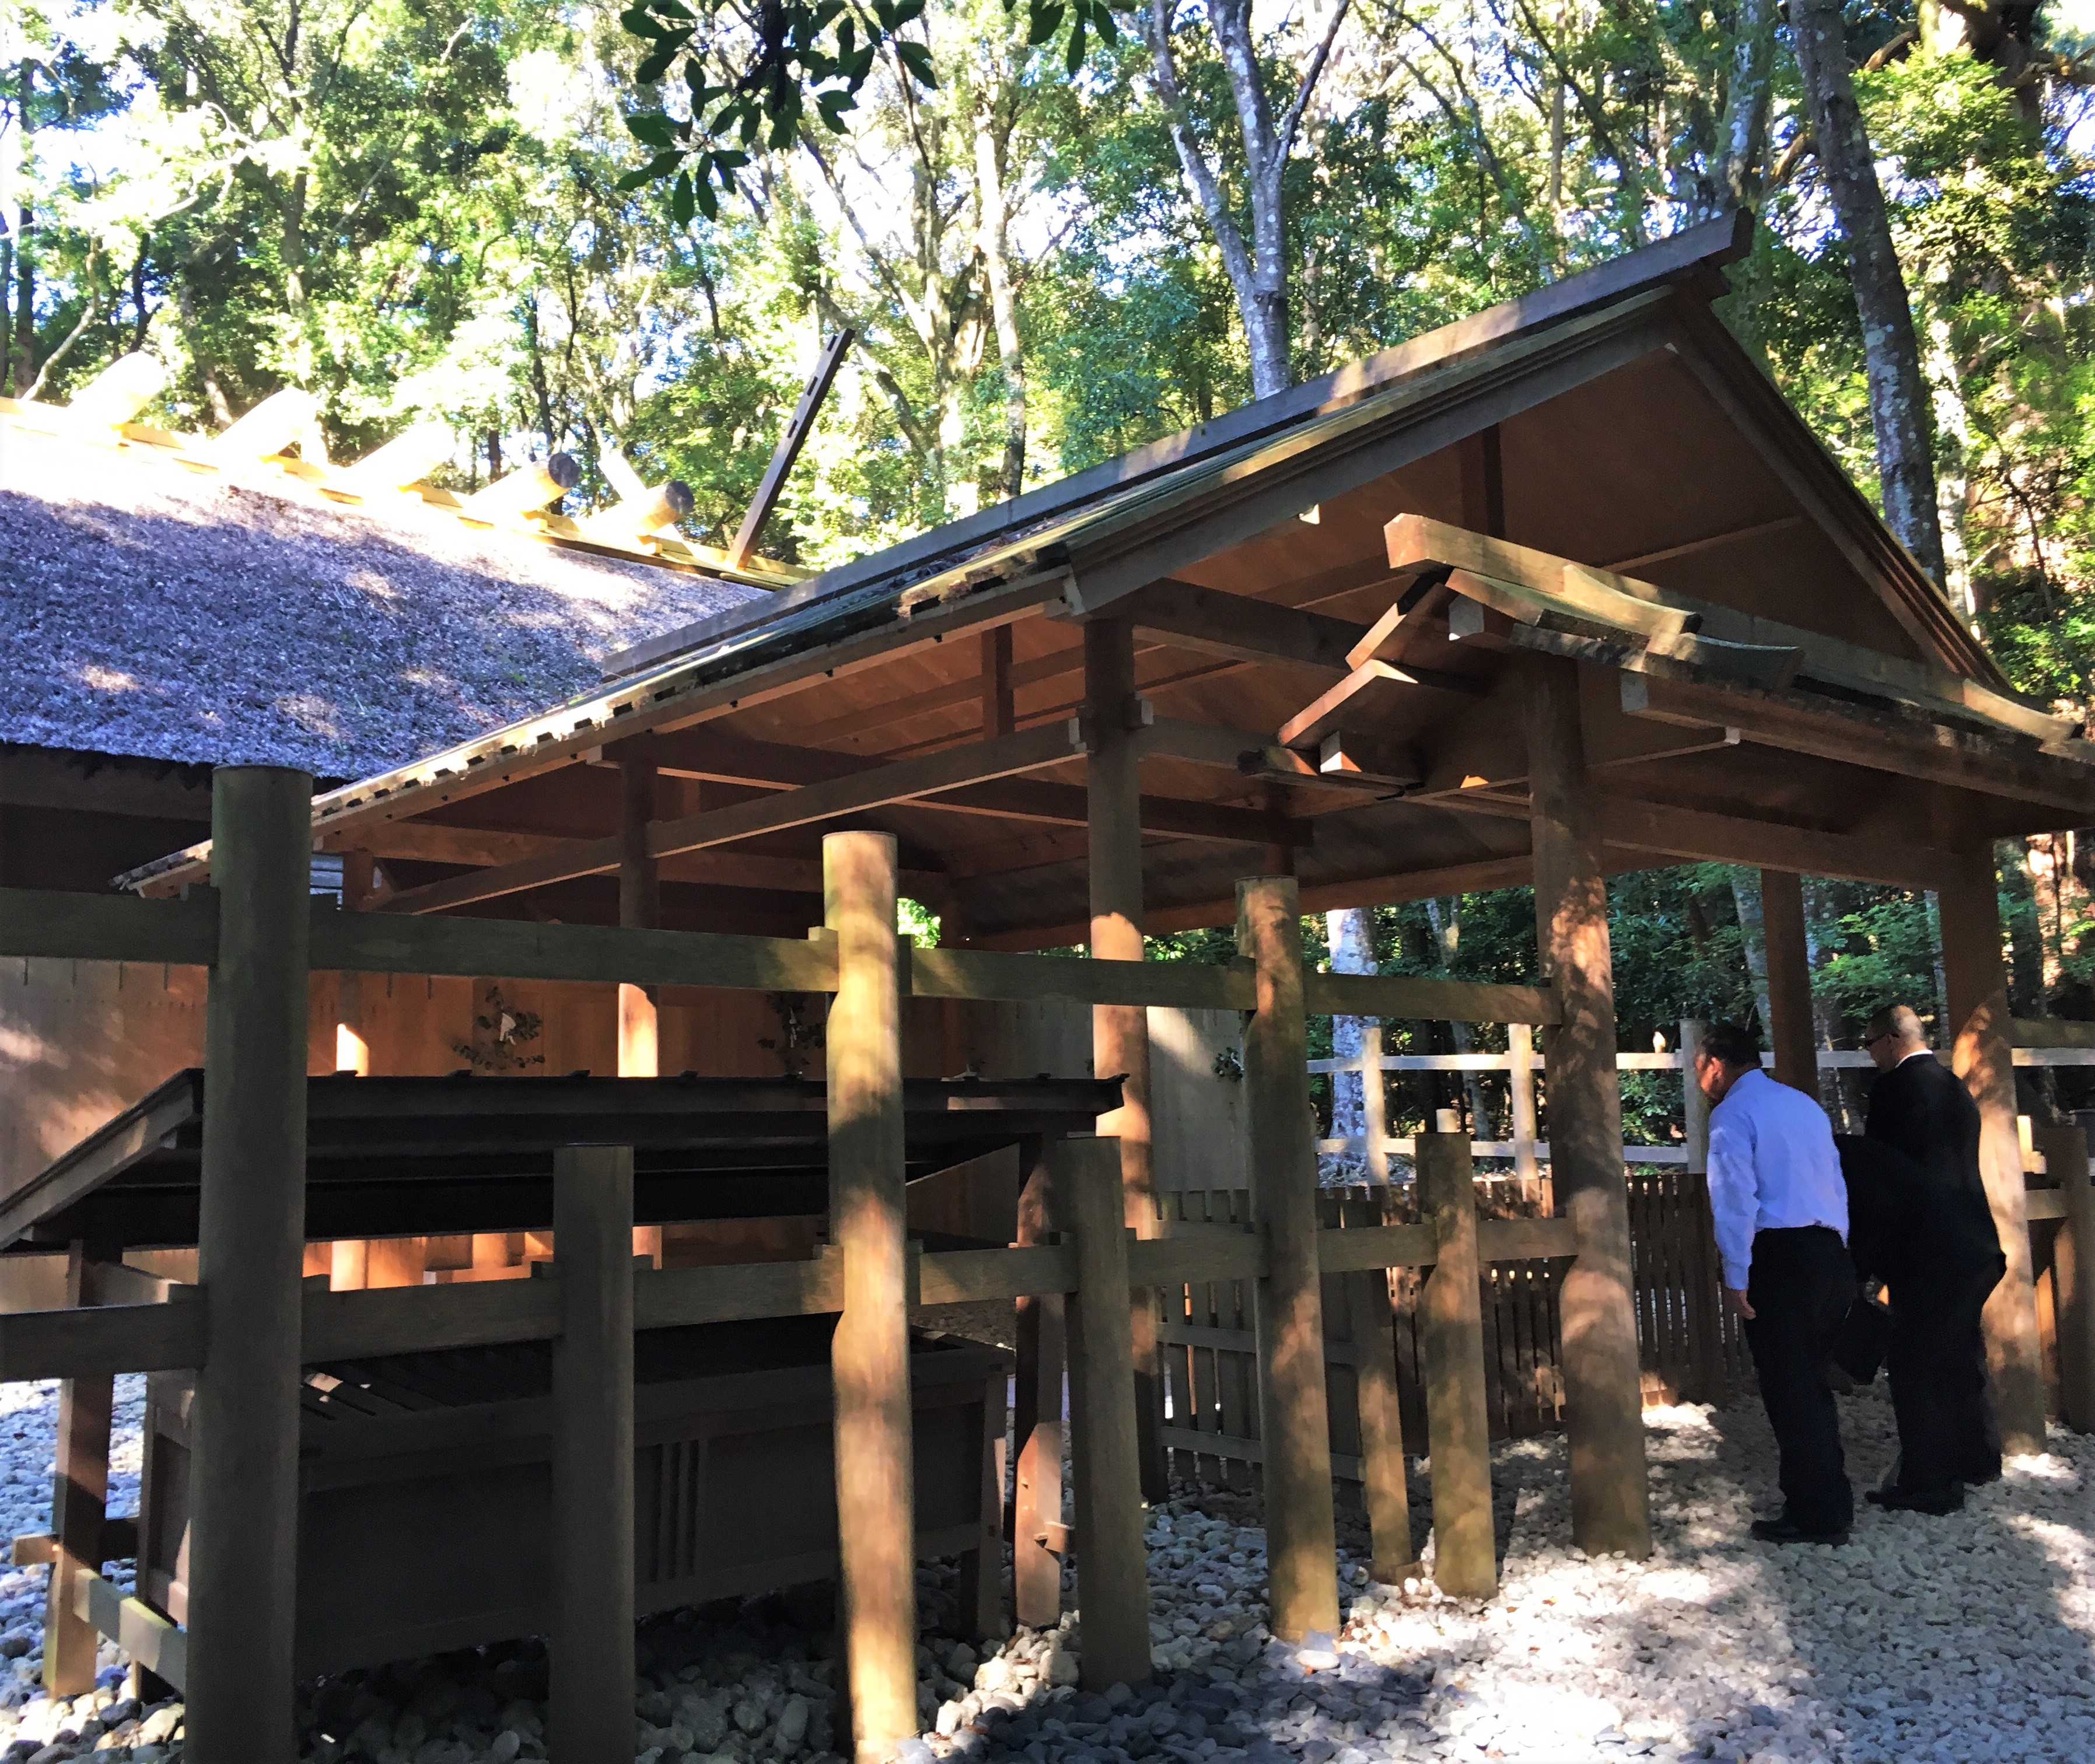 closeup of a wooden Japanese shinto shrine in the Naiku of Ise Jingu surrounded by trees and people praying